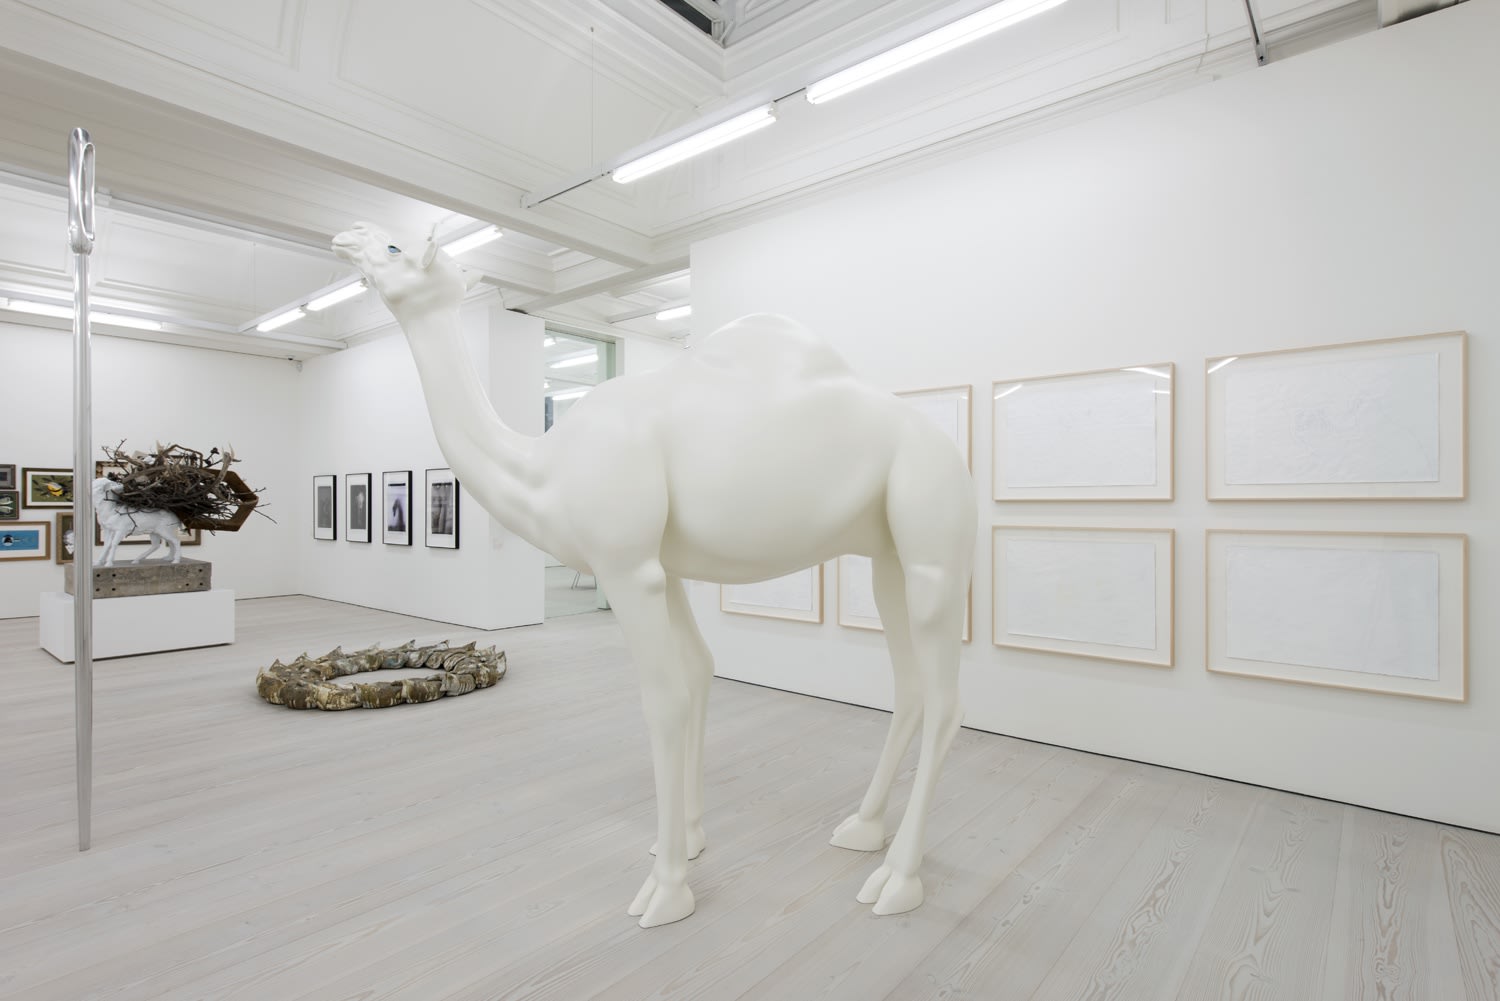 Installation view of white camel statue with blue eyes.